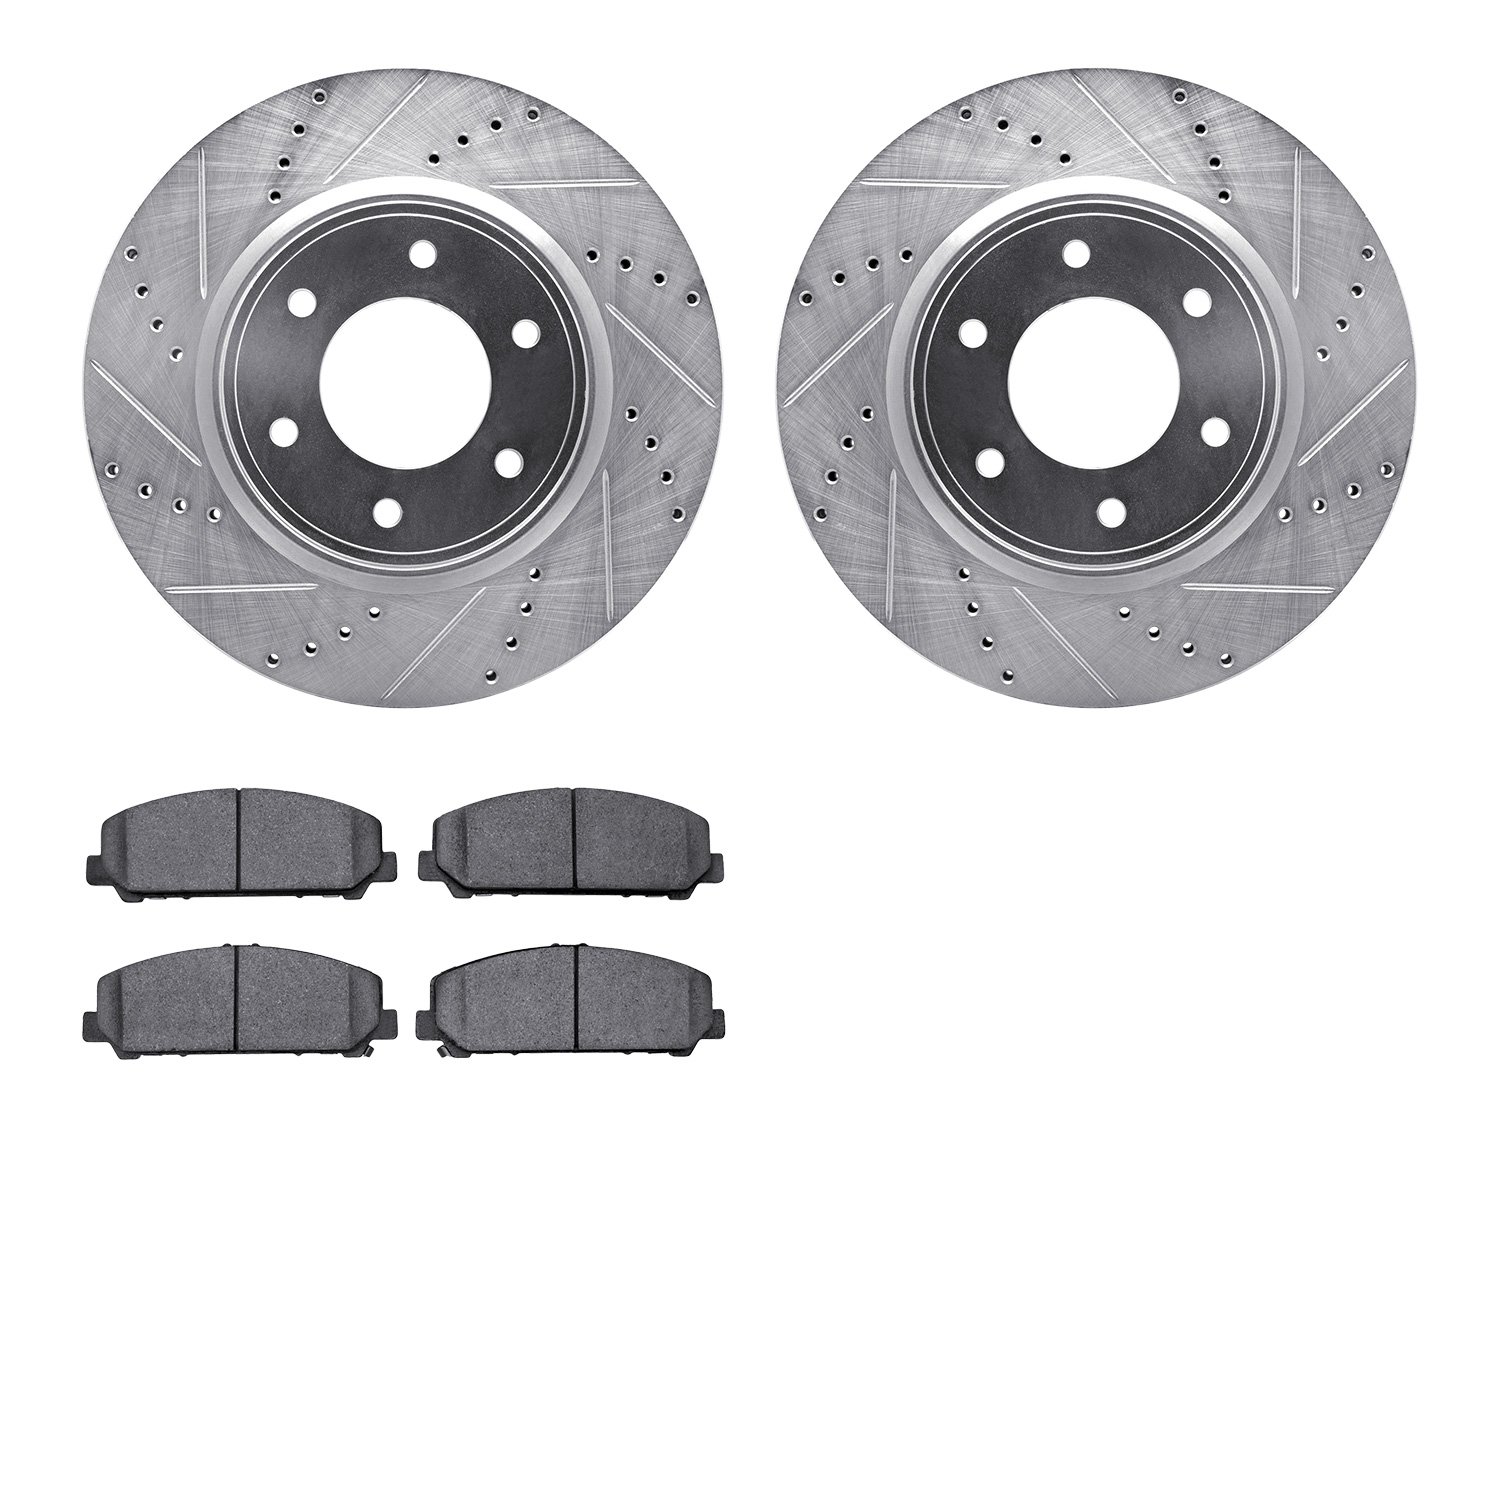 7402-67005 Drilled/Slotted Brake Rotors with Ultimate-Duty Brake Pads Kit [Silver], Fits Select Infiniti/Nissan, Position: Front